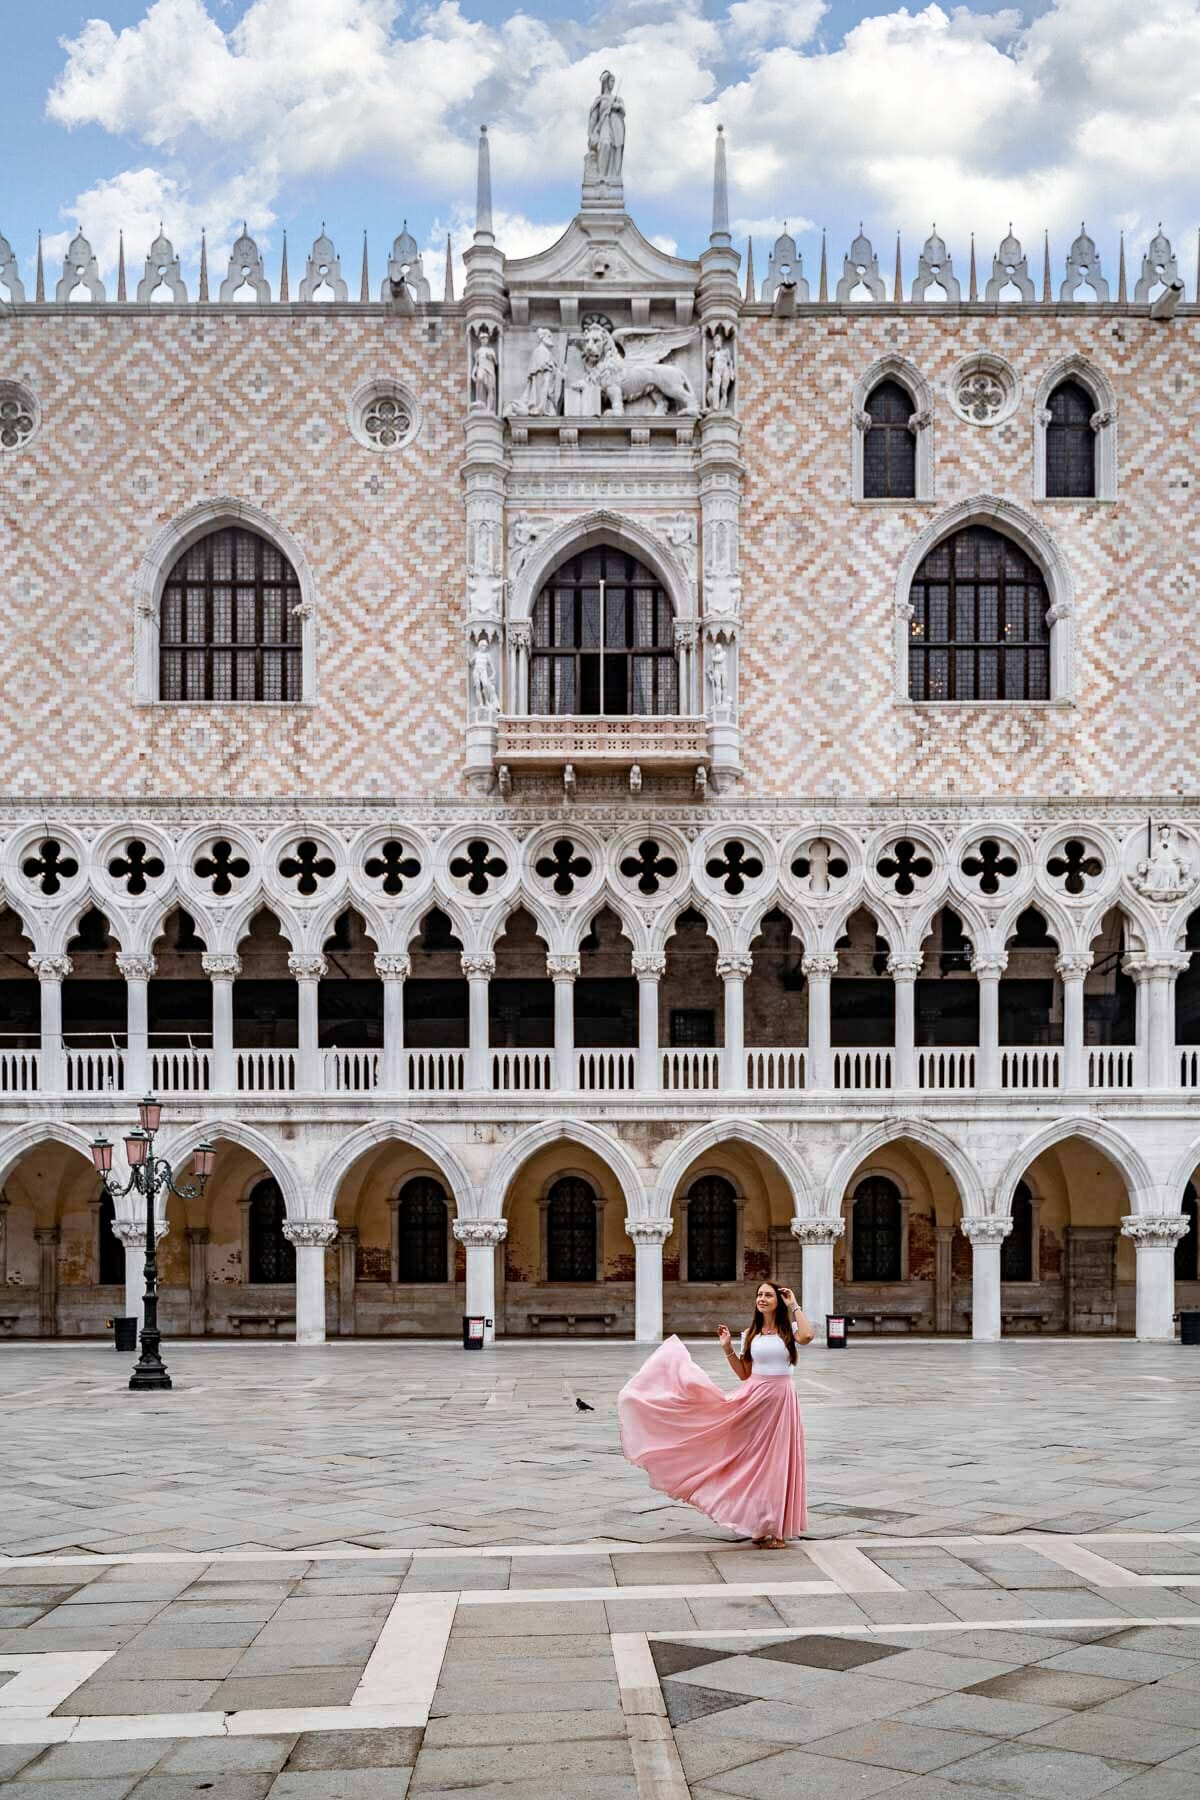 Girl in a pink skirt standing in front of Doge's Palace in Venice, Italy